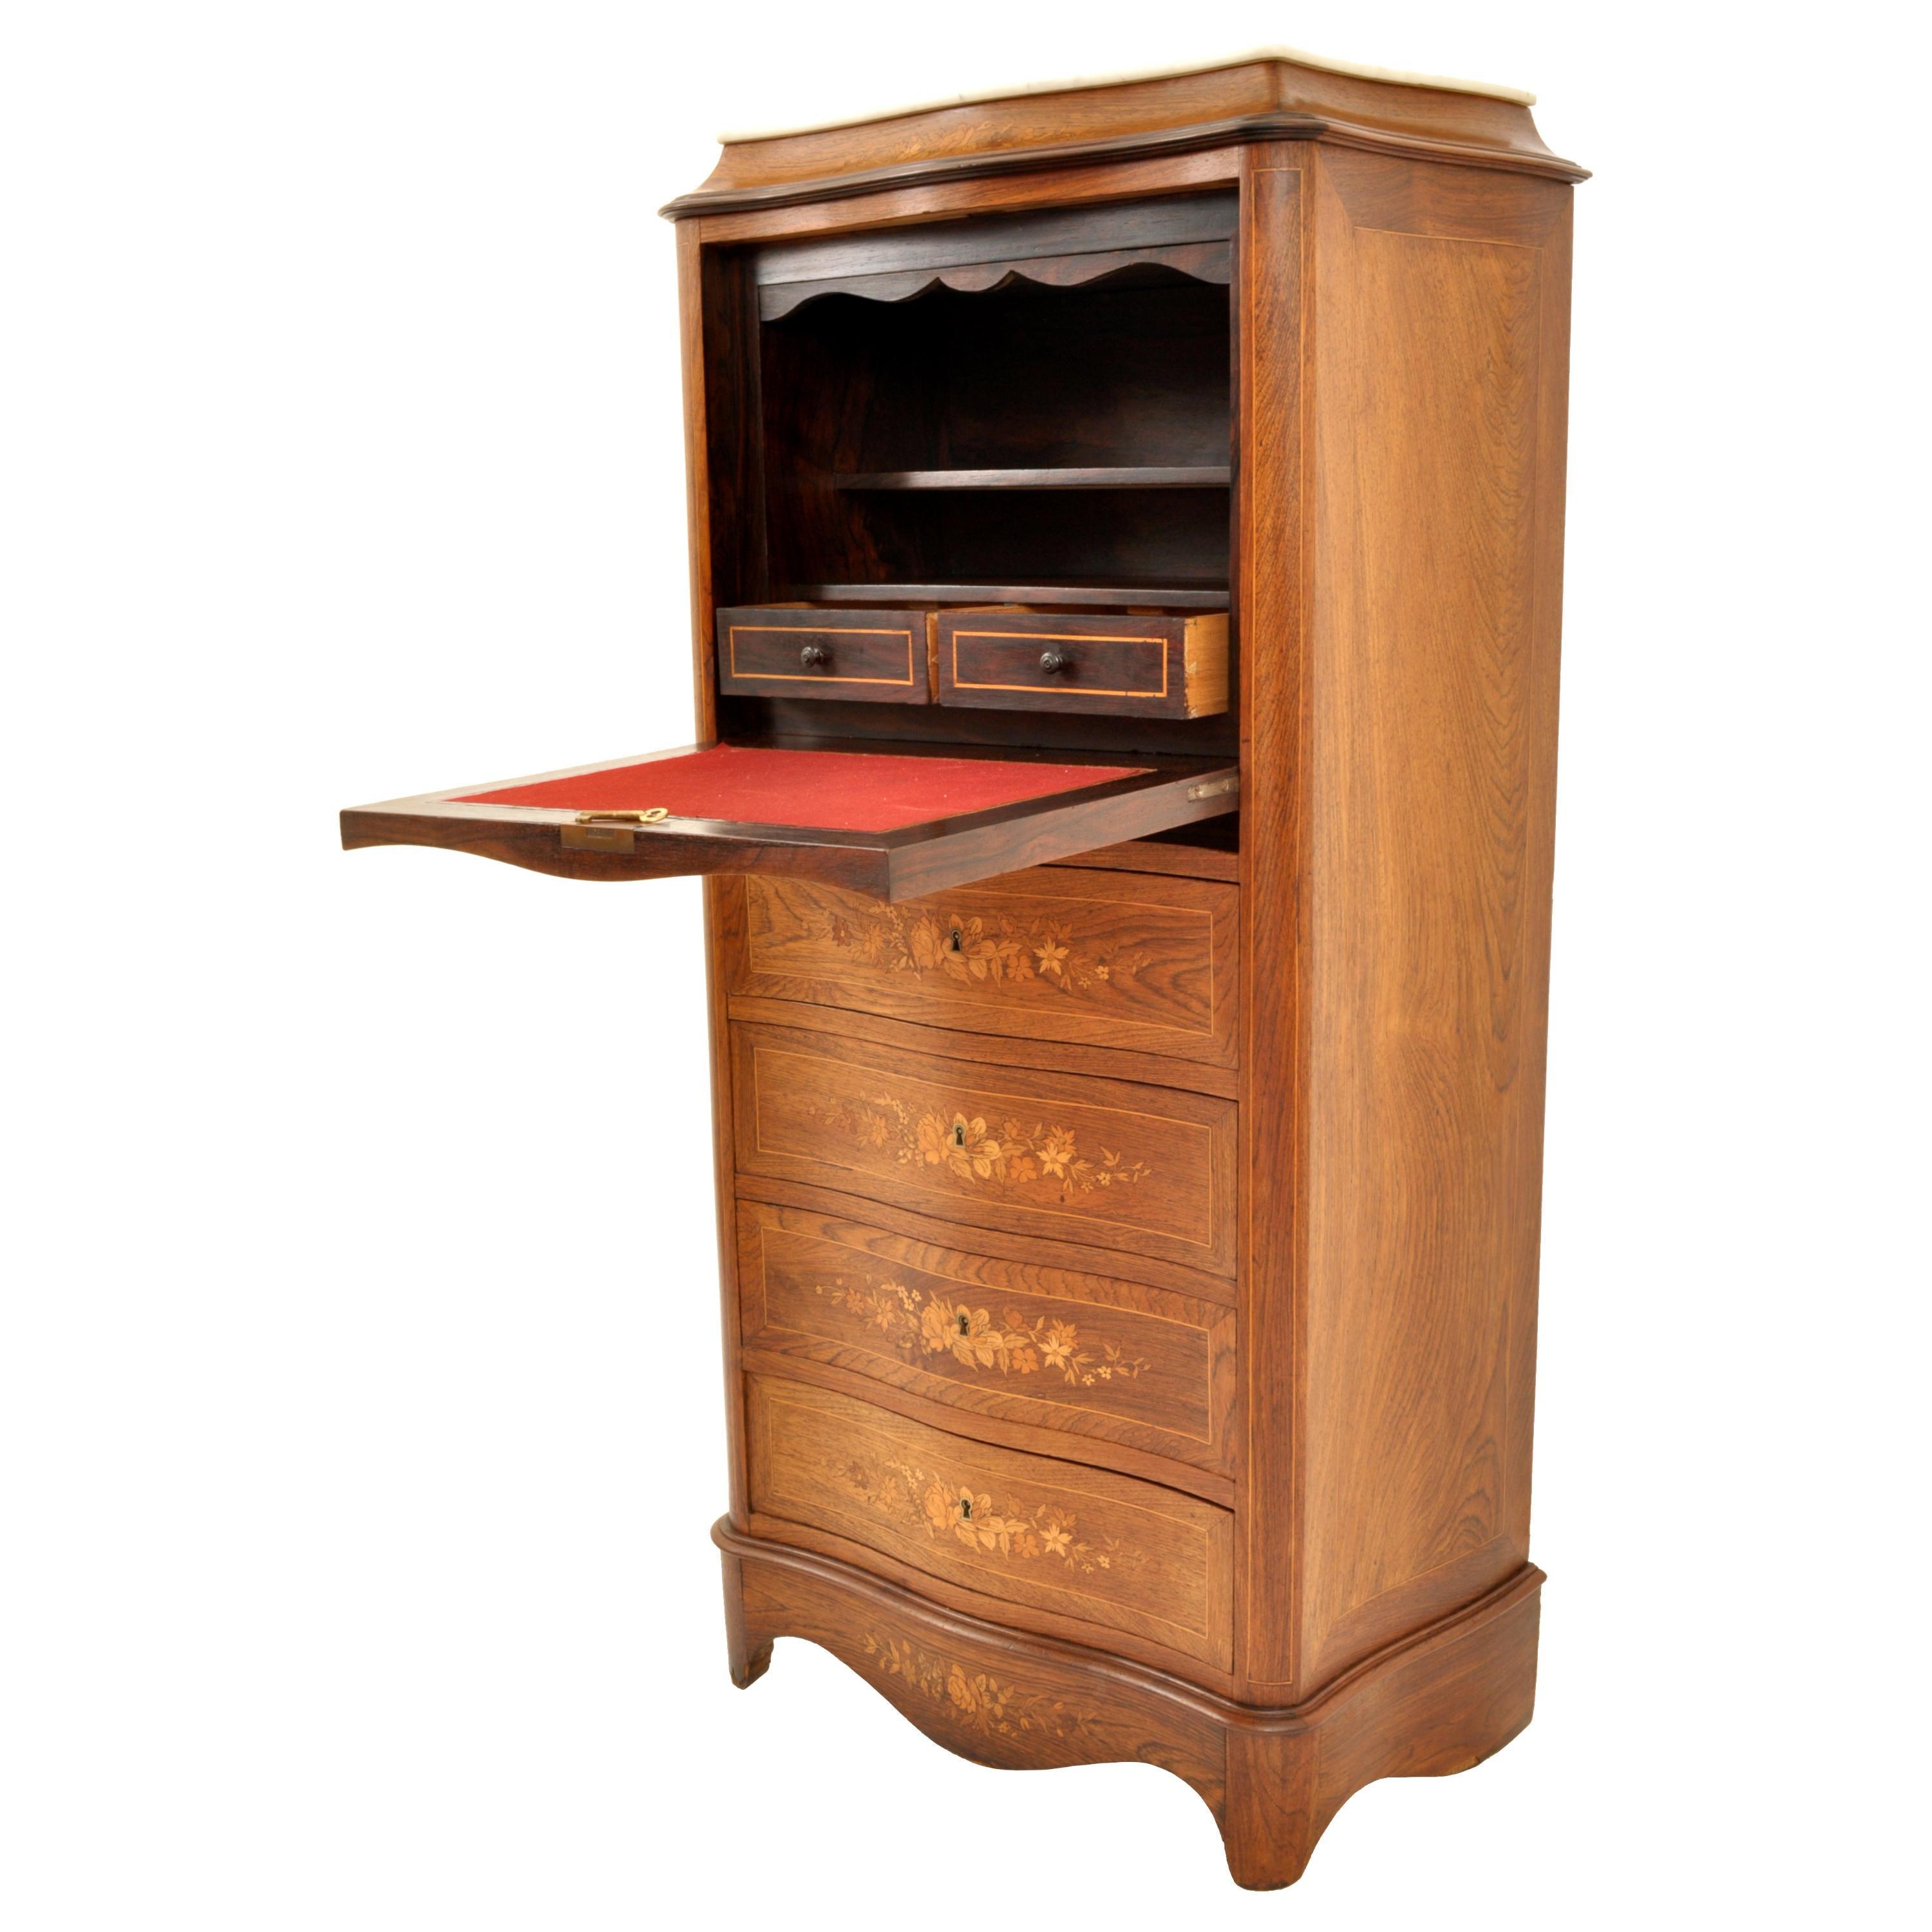 A good quality antique French inlaid marquetry Rosewood secretaire abattant, circa 1880.
Made from the finest rosewood and of serpentine or bombe shape, with a Carrara marble top, the locking fall-front top (with key) delicately inlaid with floral